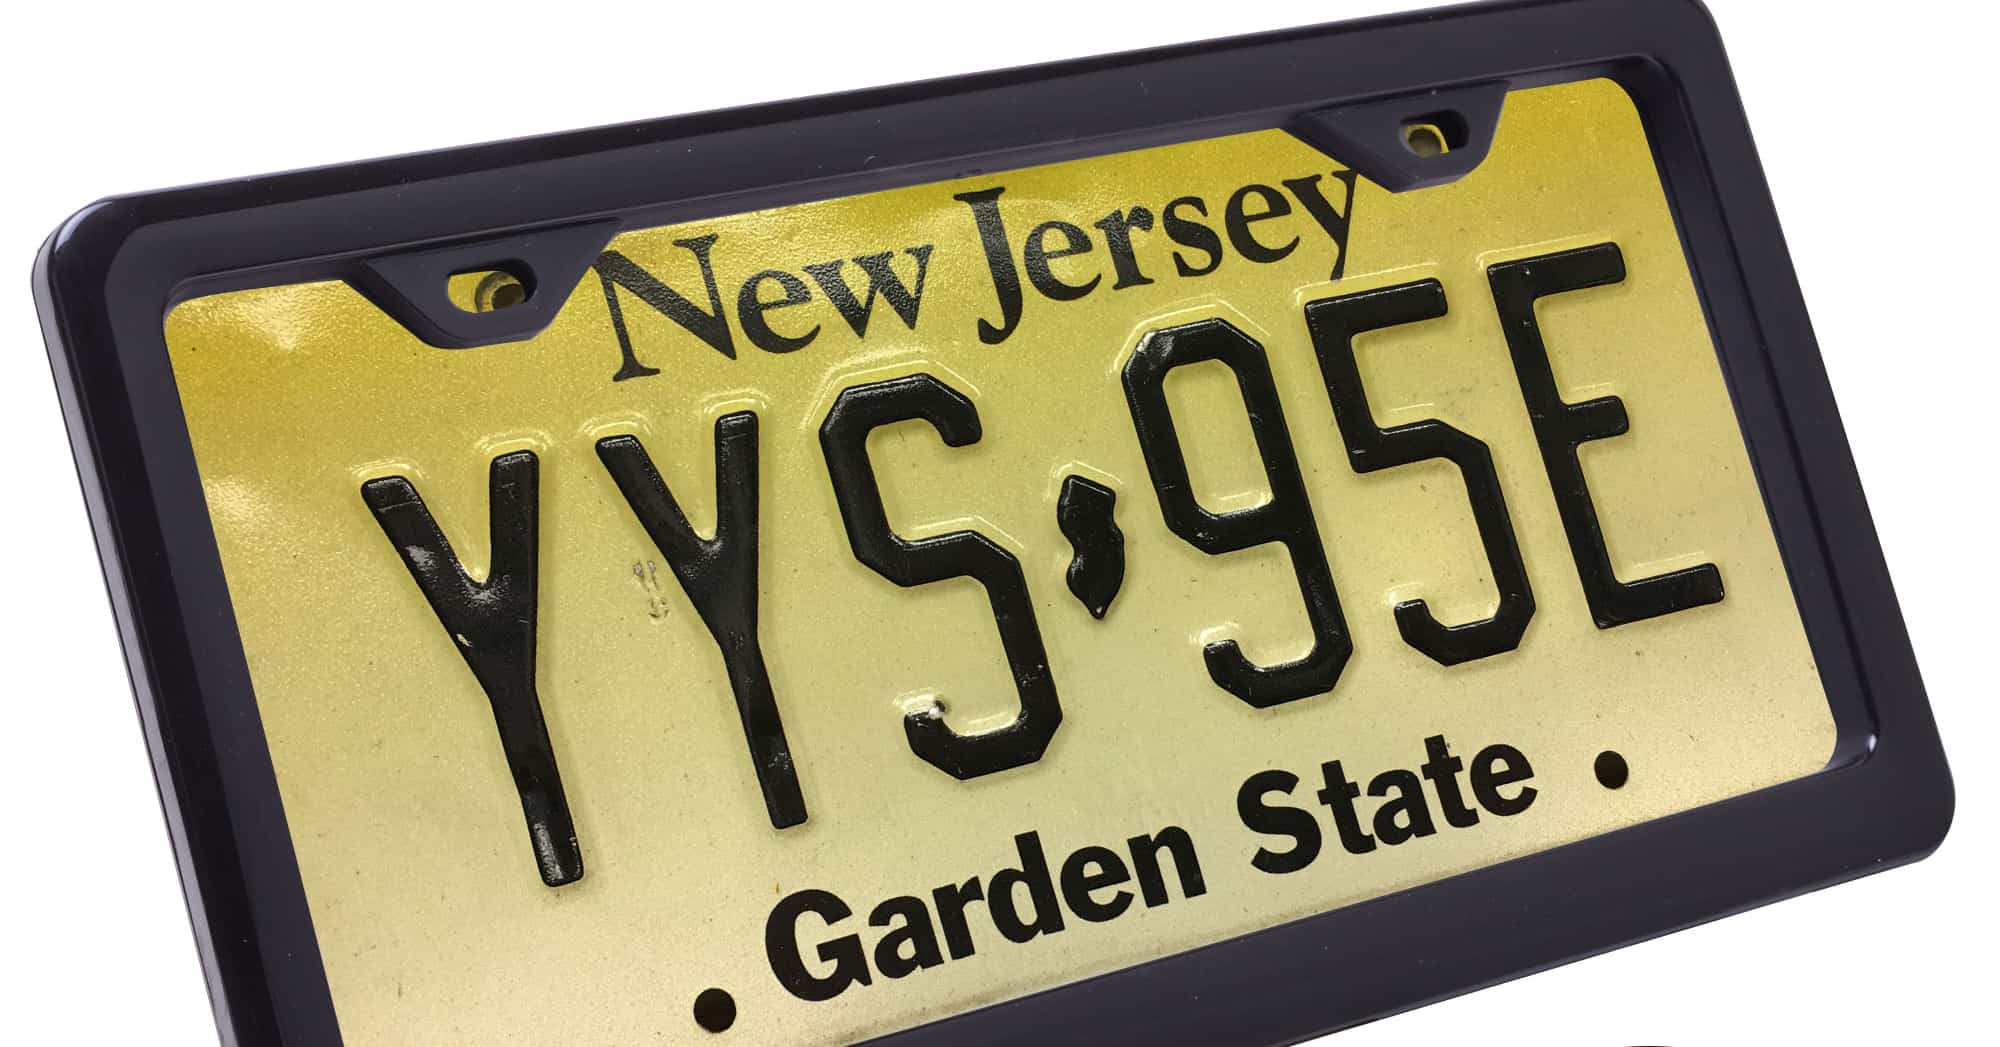 State to merchants: License plate holders must not conceal information